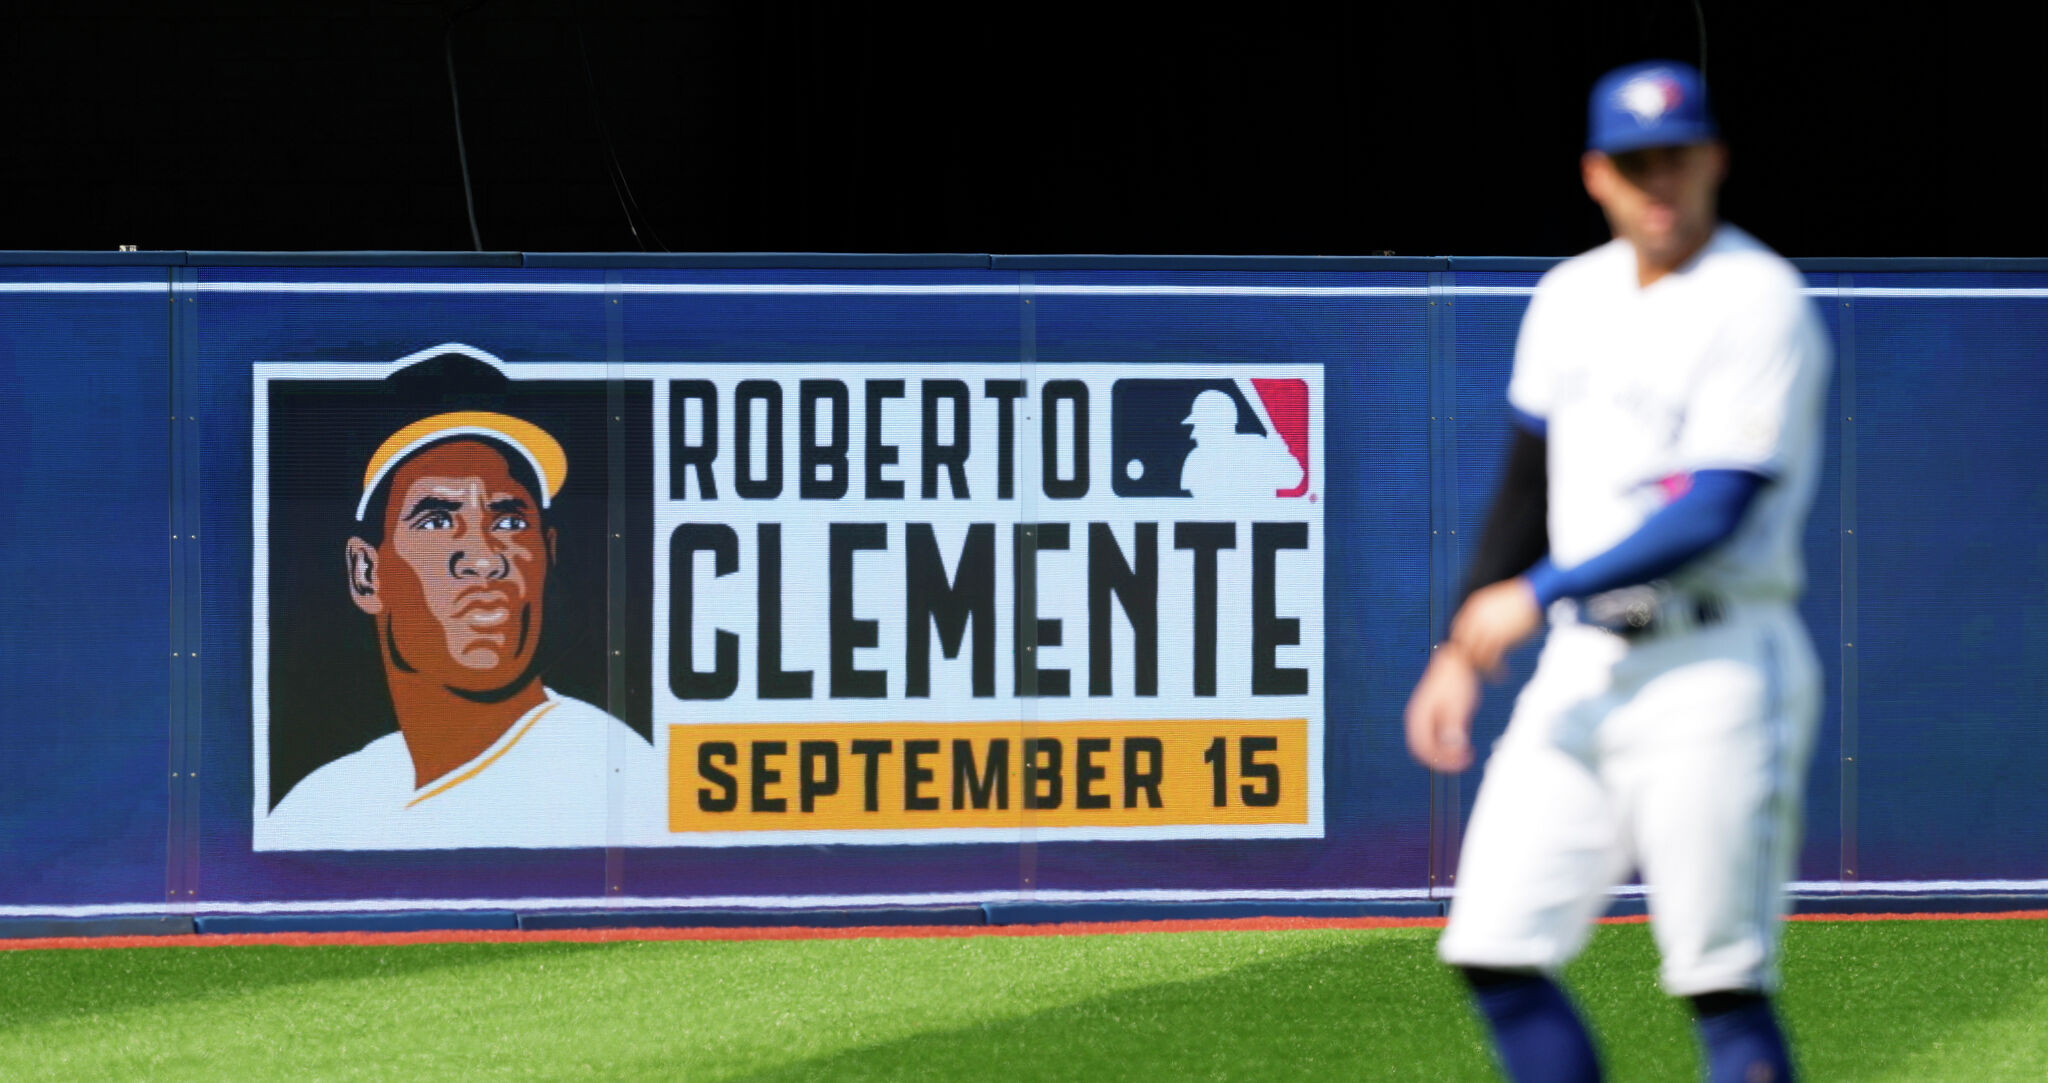 Five Astros wear No. 21 on Roberto Clemente Day